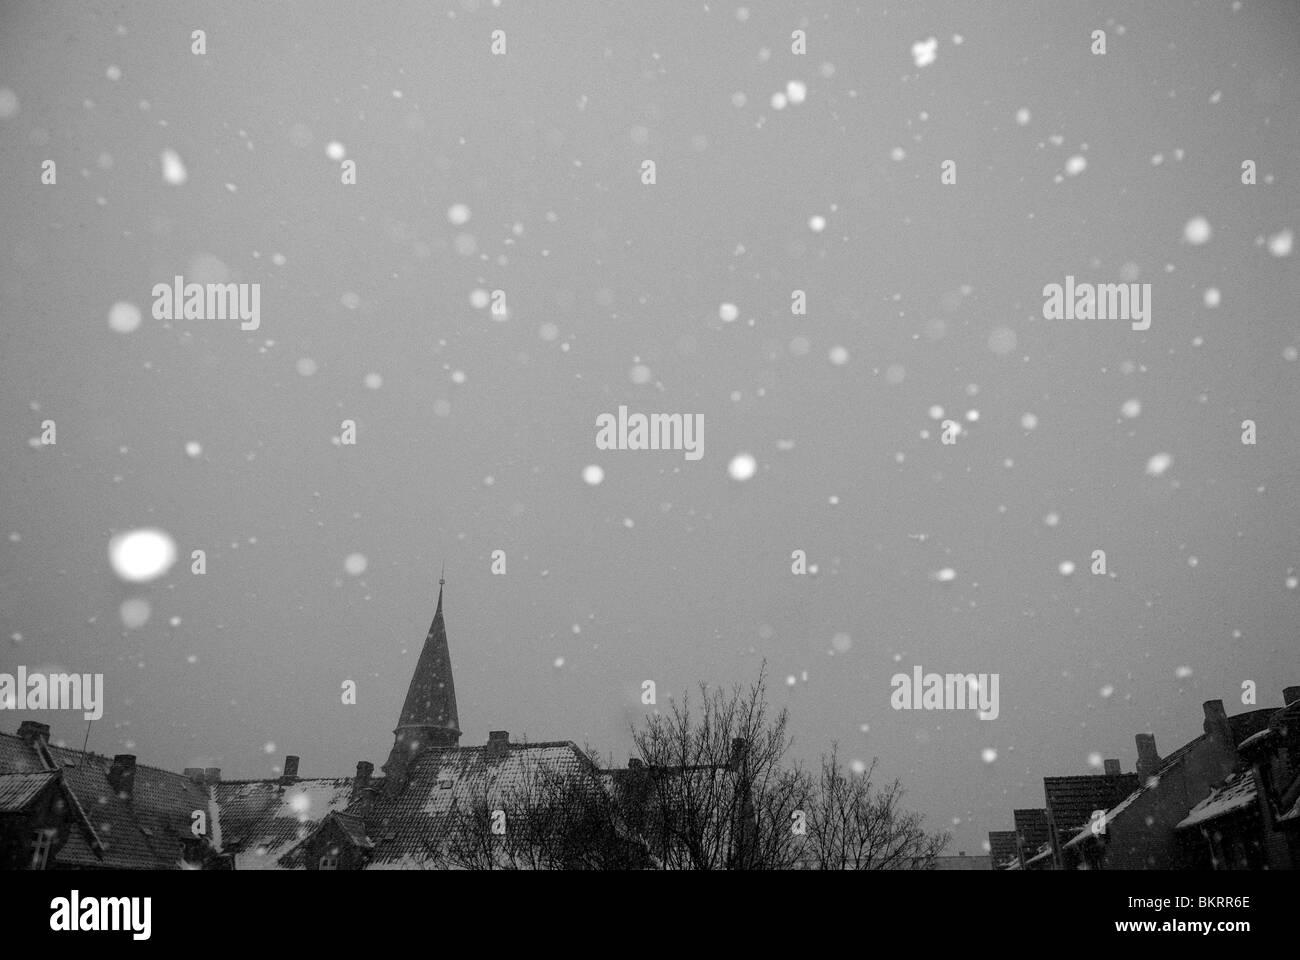 SNOW IS FALLING Stock Photo